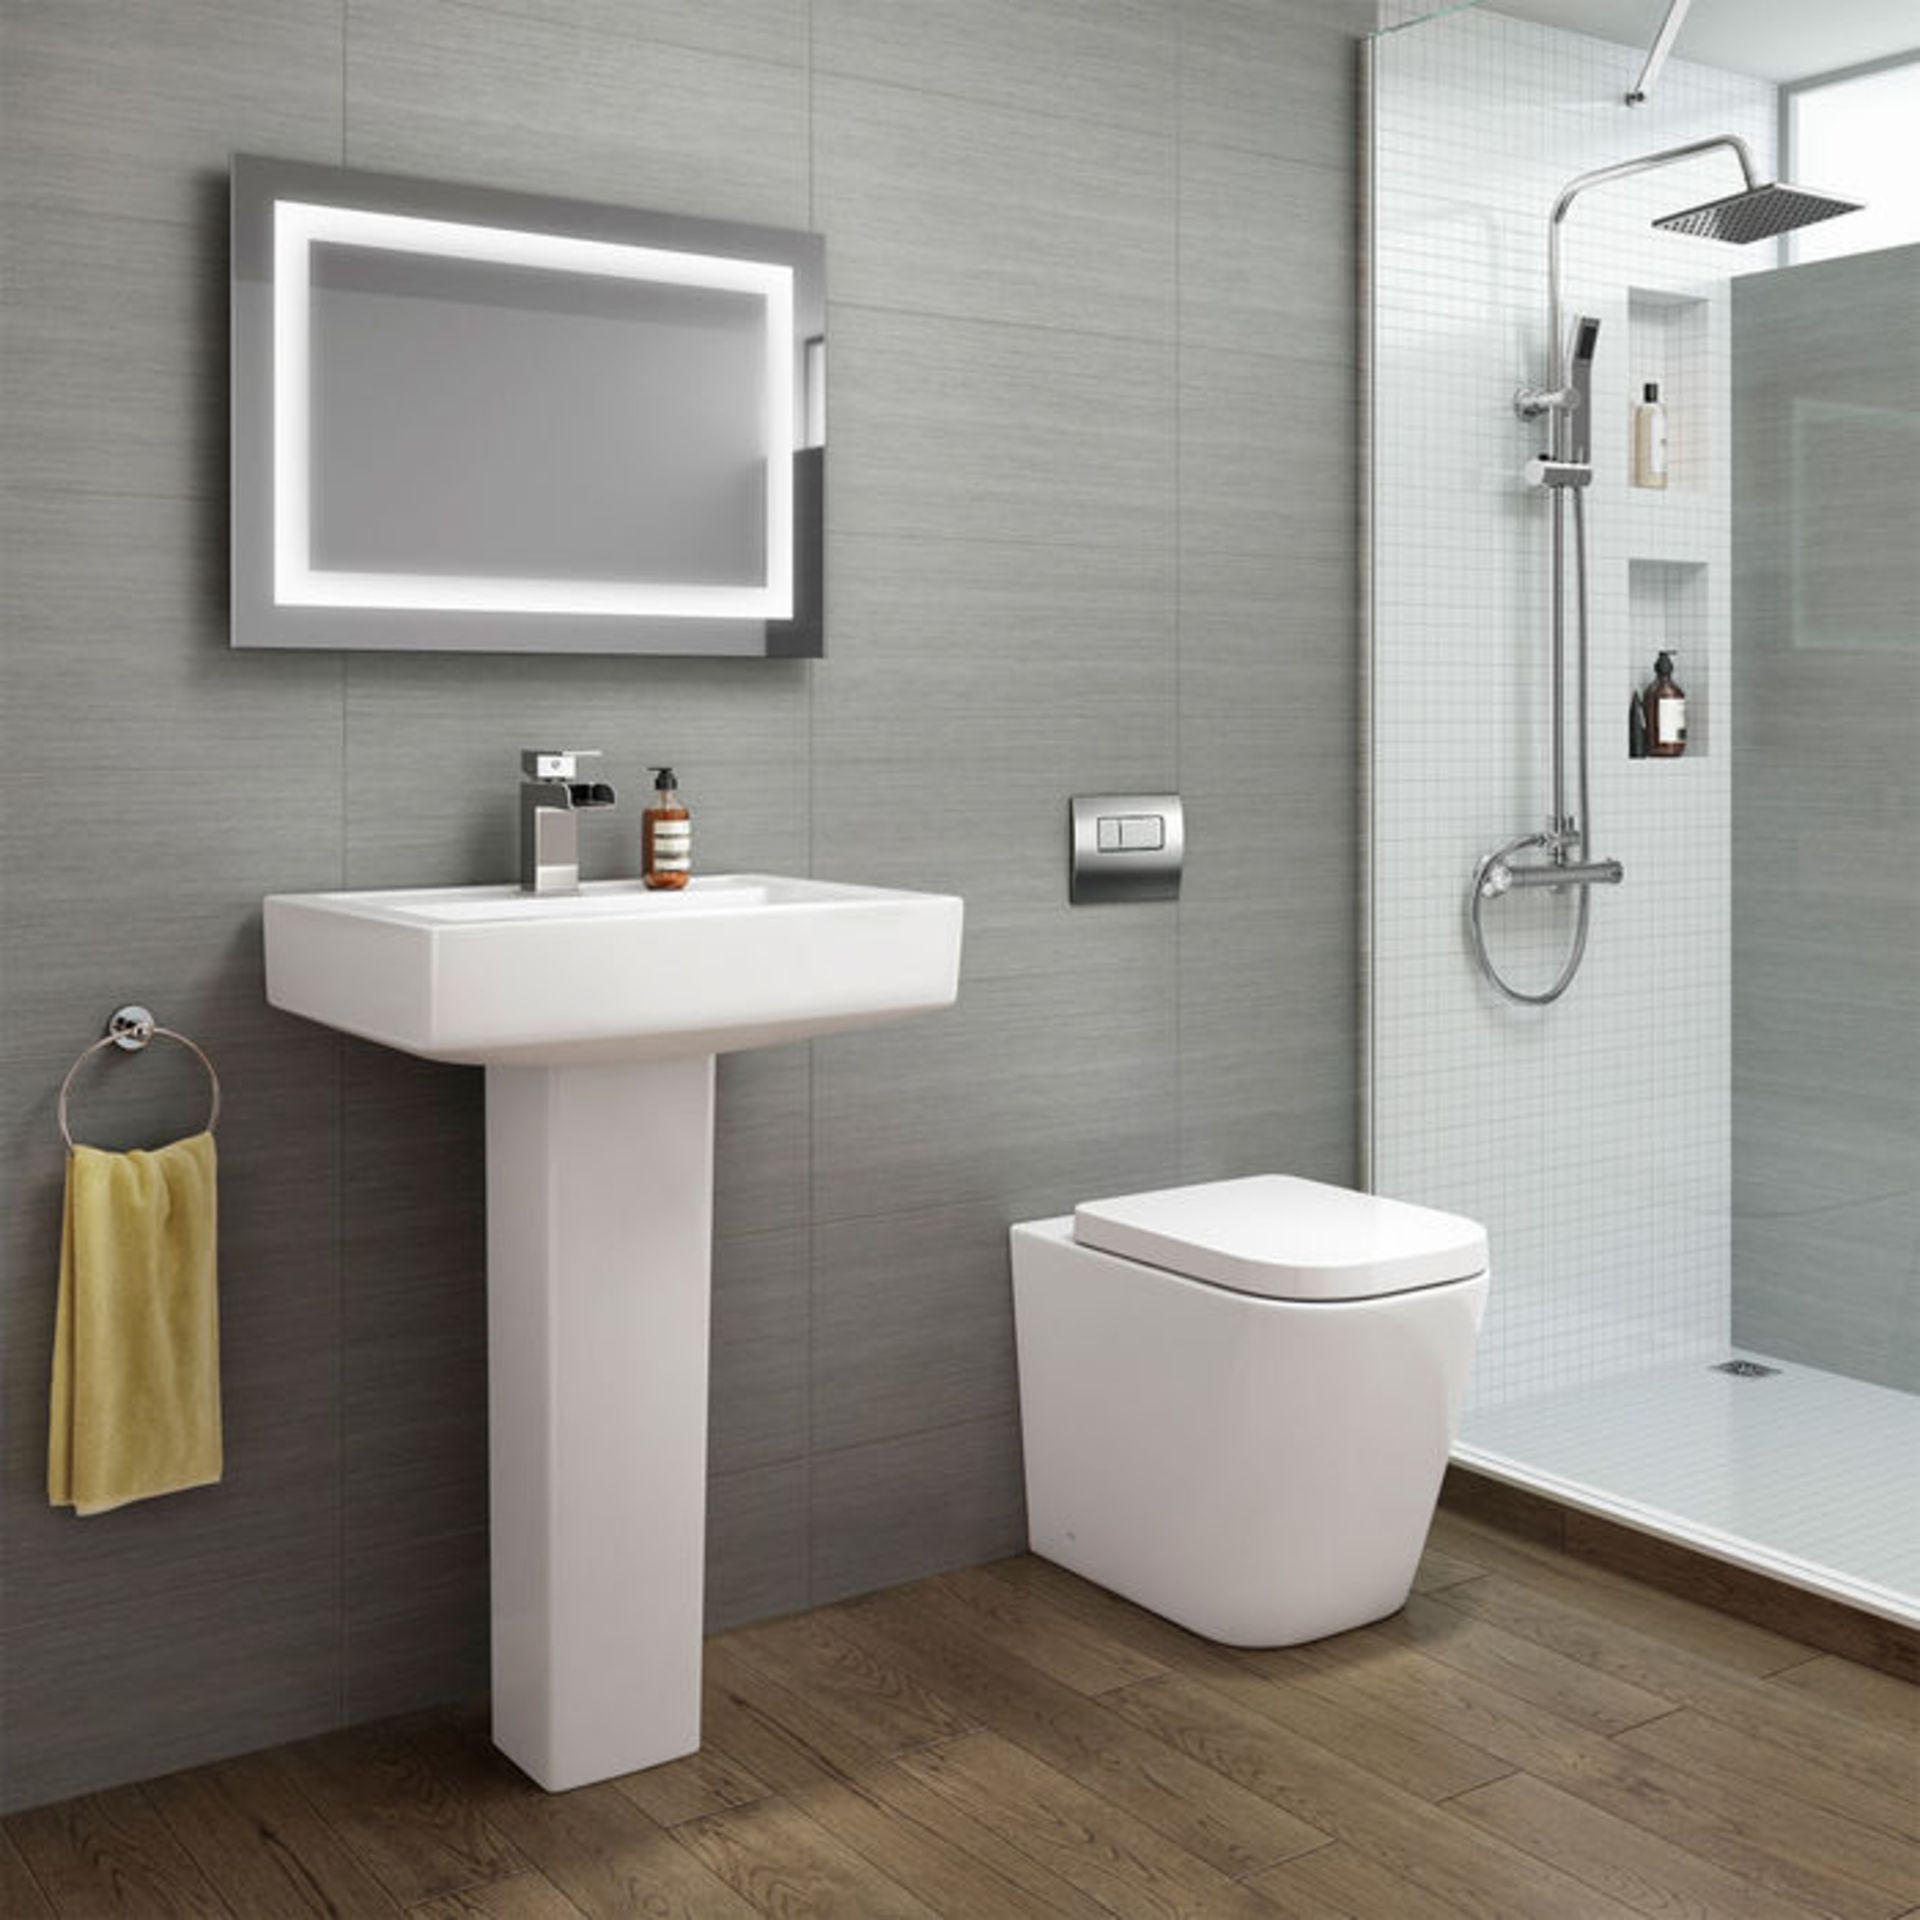 New Florence Rimless Back To Wall Toilet Inc Luxury Soft Close Seat Rimless Design Makes It Easy - Image 2 of 2